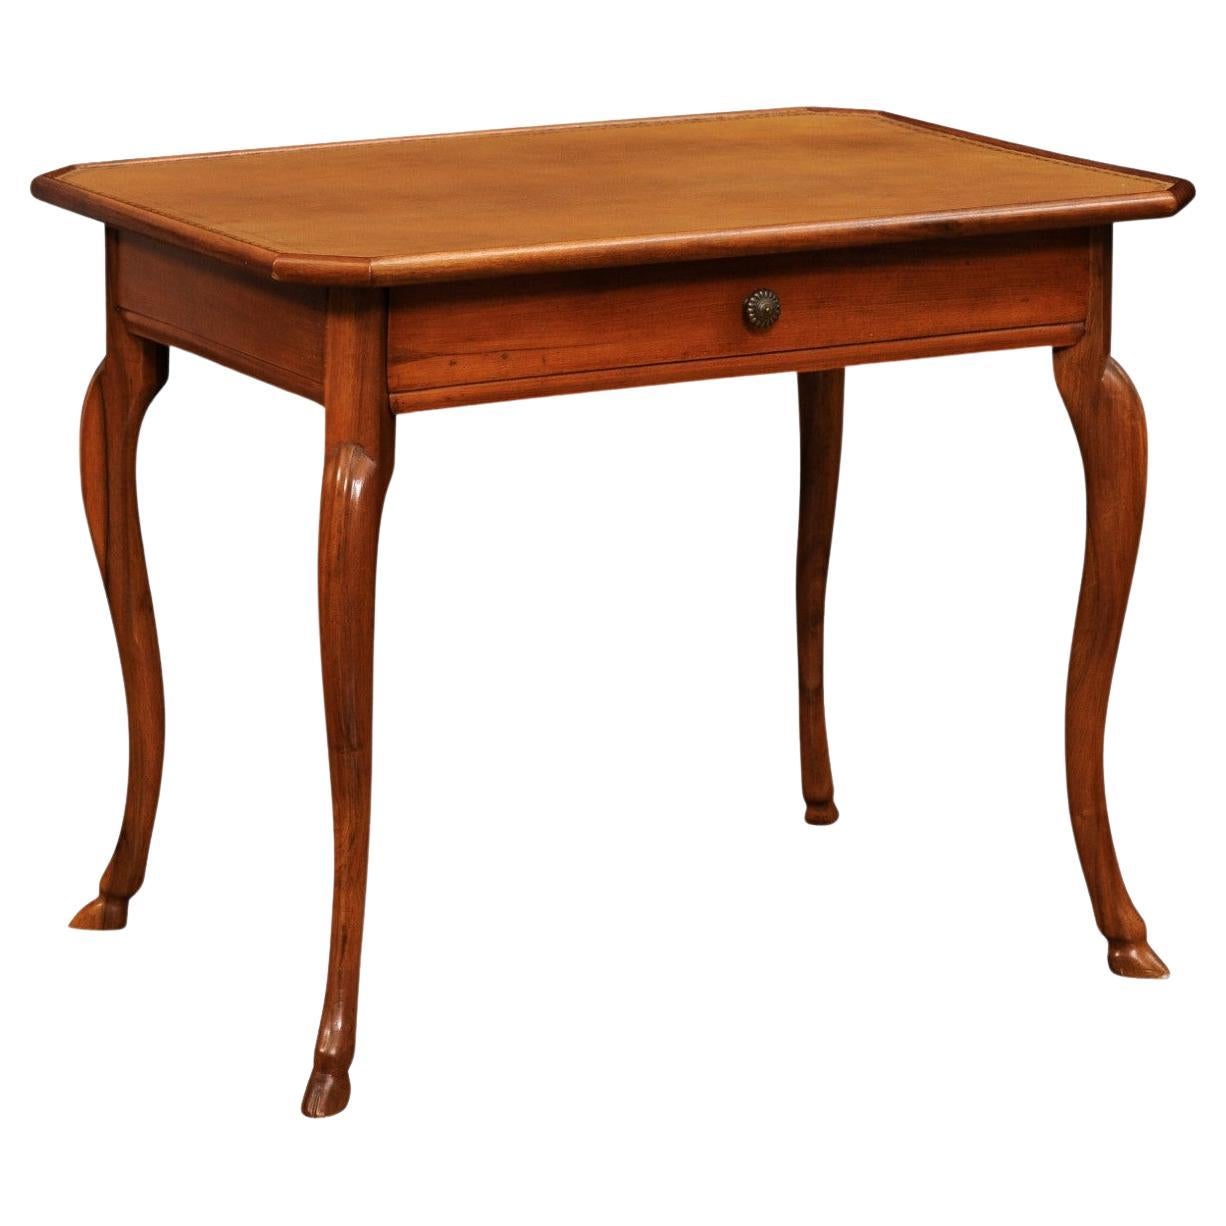 French Louis XV Period 1750s Walnut Desk with Leather Top and Cabriole Legs For Sale